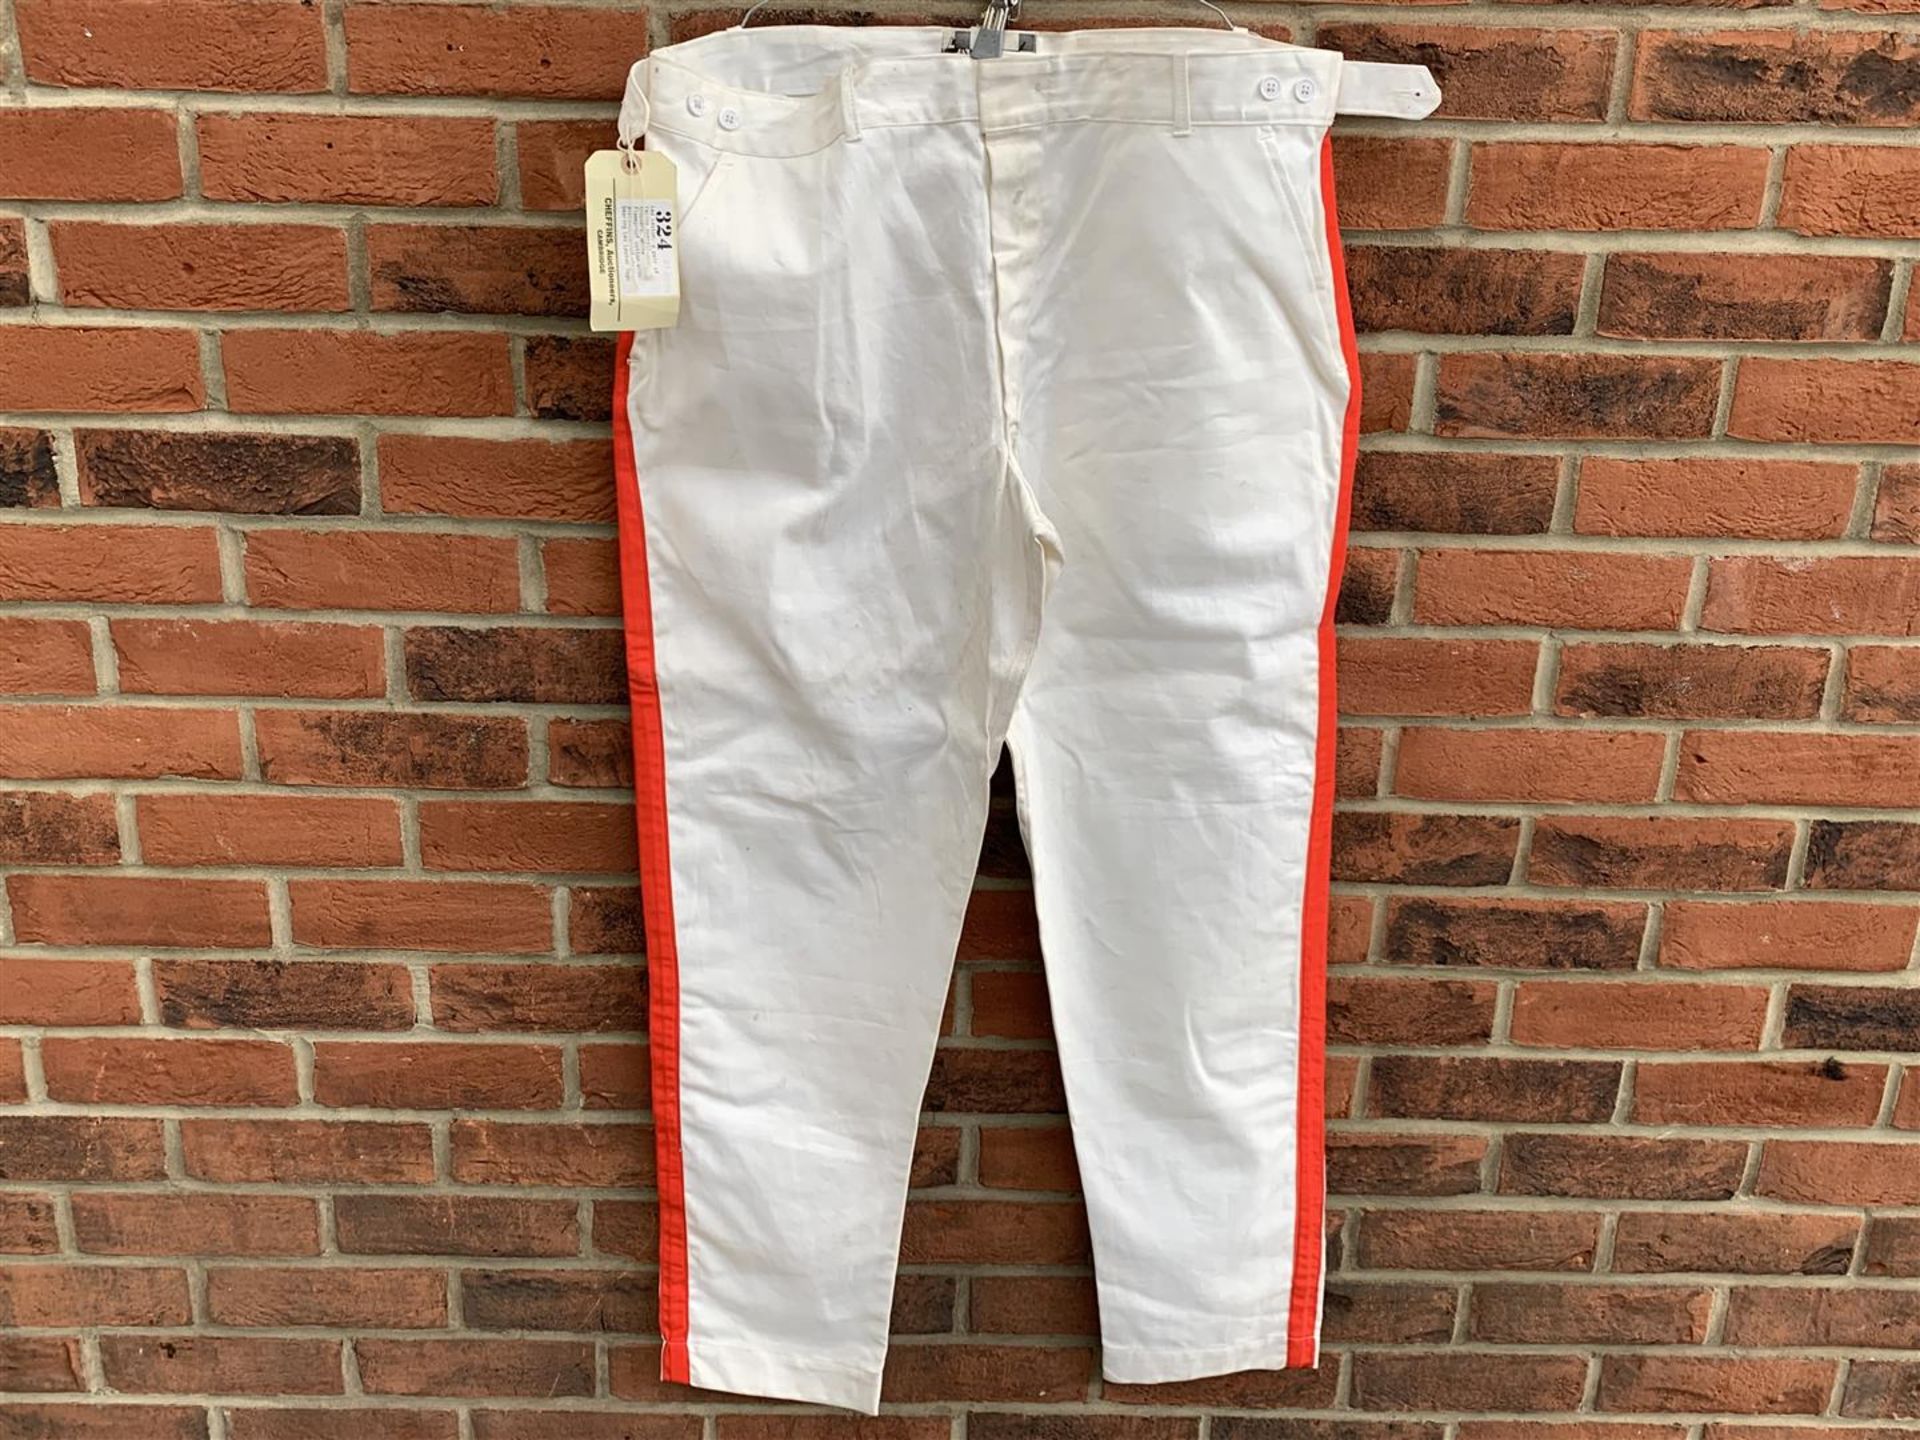 Pair Of Les Leston Racing Trousers (With Red Stripe)